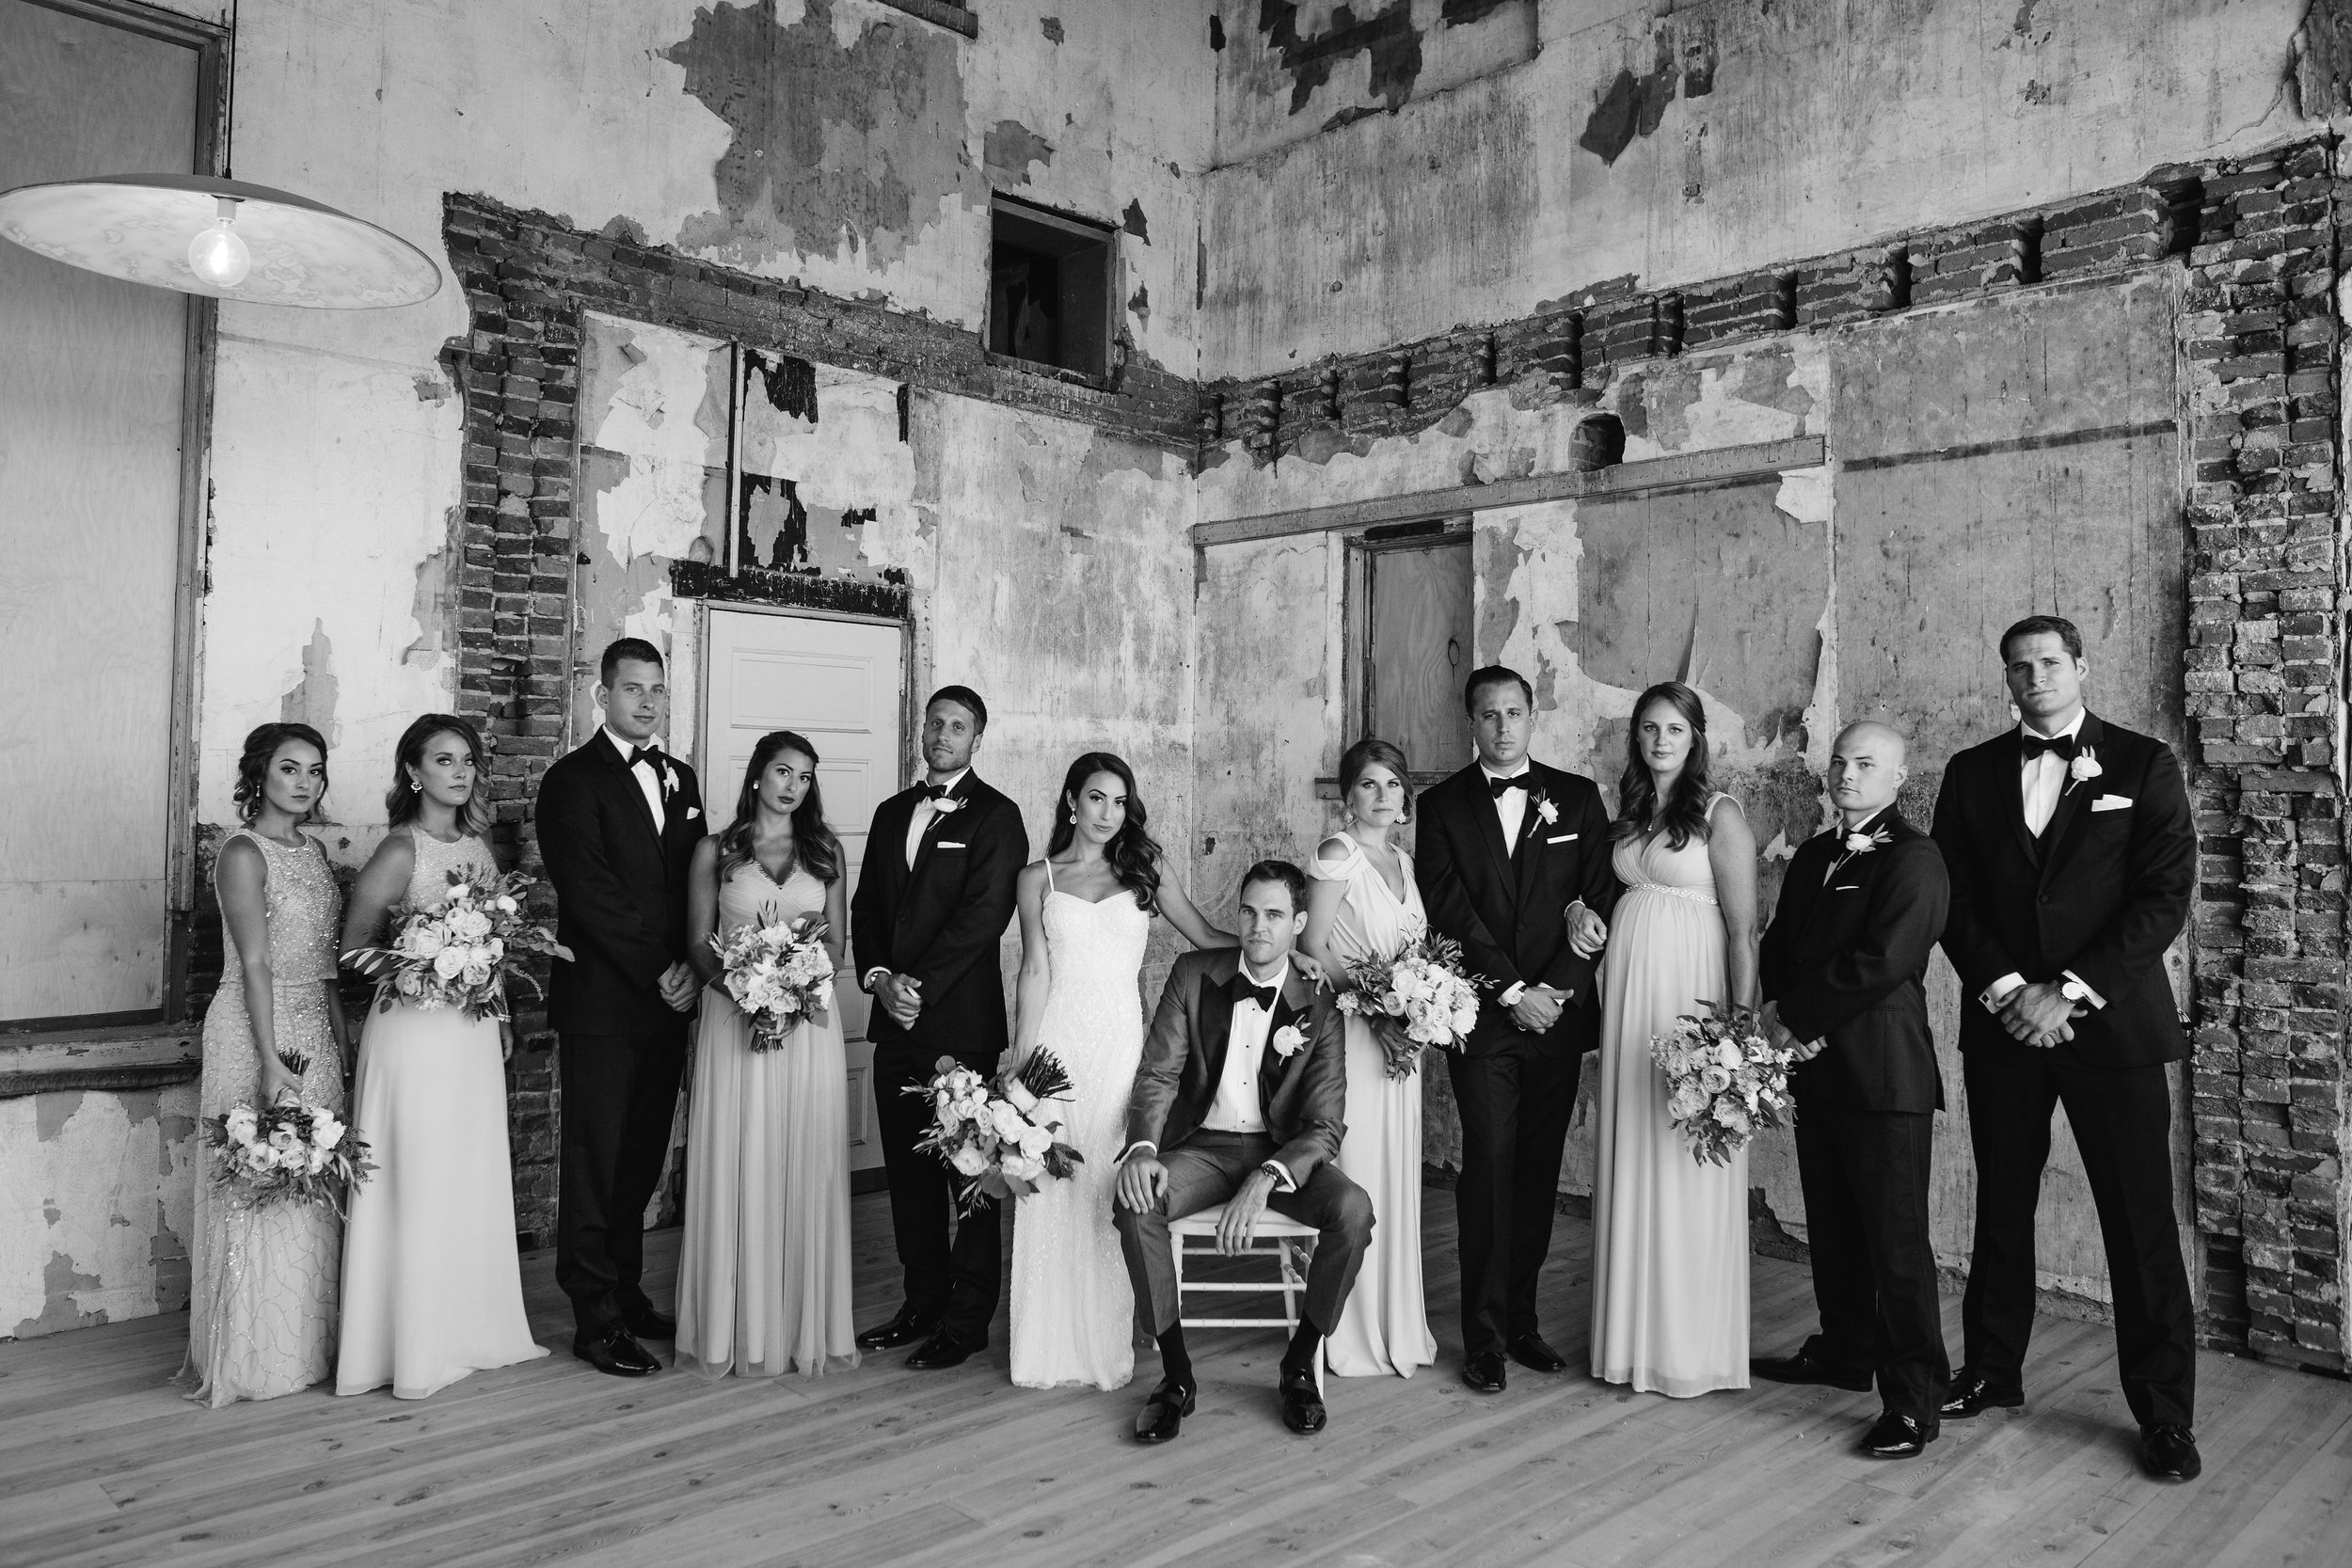 Bridal party portrait in rustic eclectic unfinished room at Excelsior